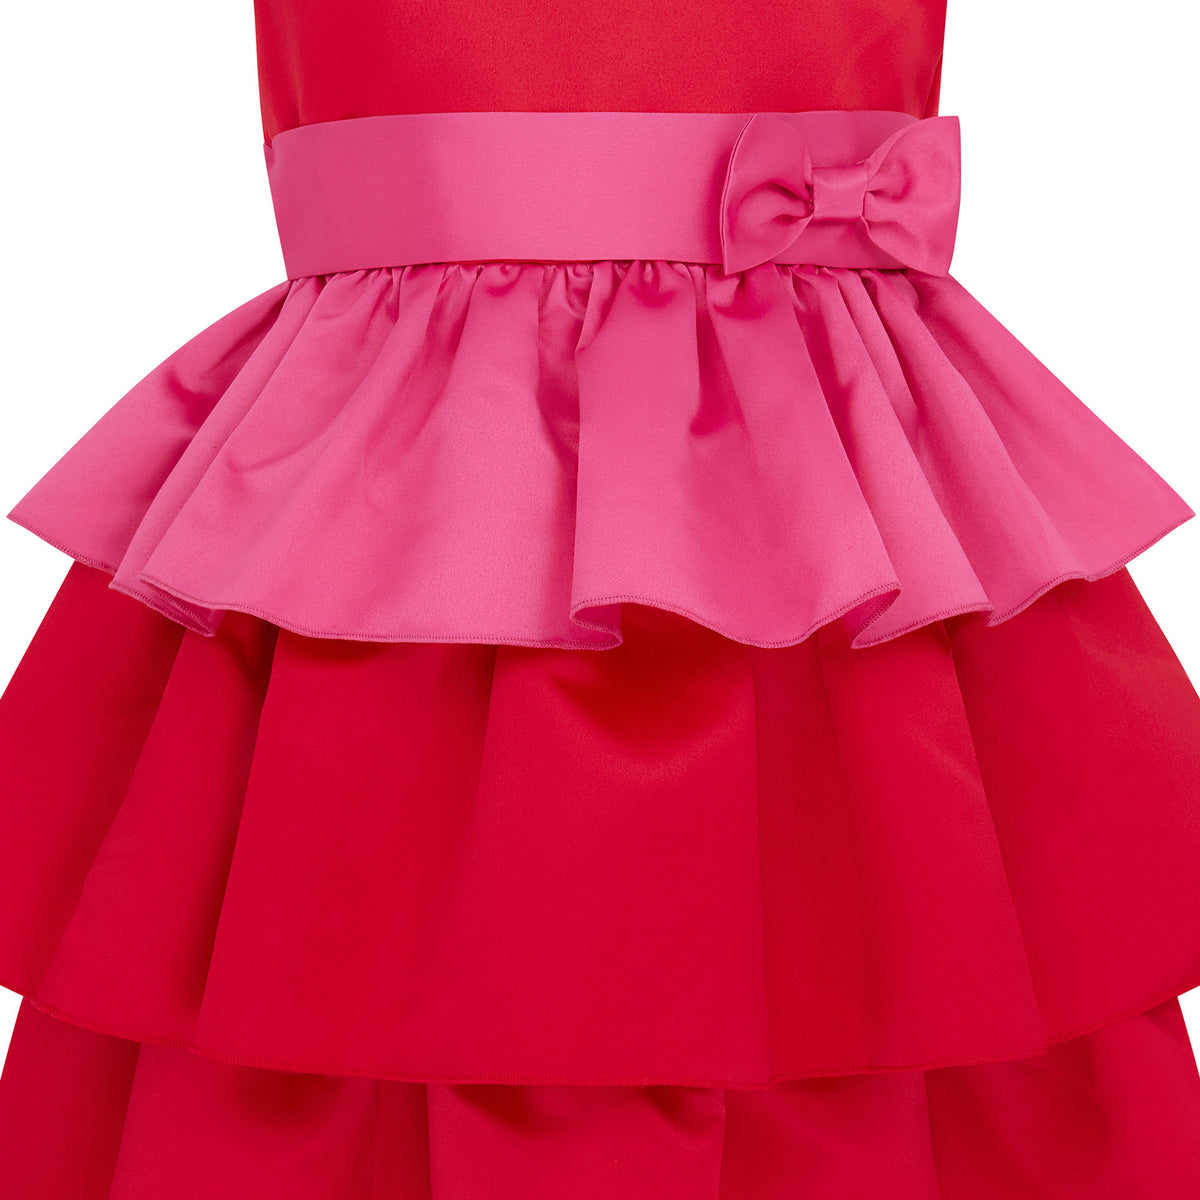 Ruby Frill Velvet & Satin Girls Party Dress Red & Pink | Holly Hastie London